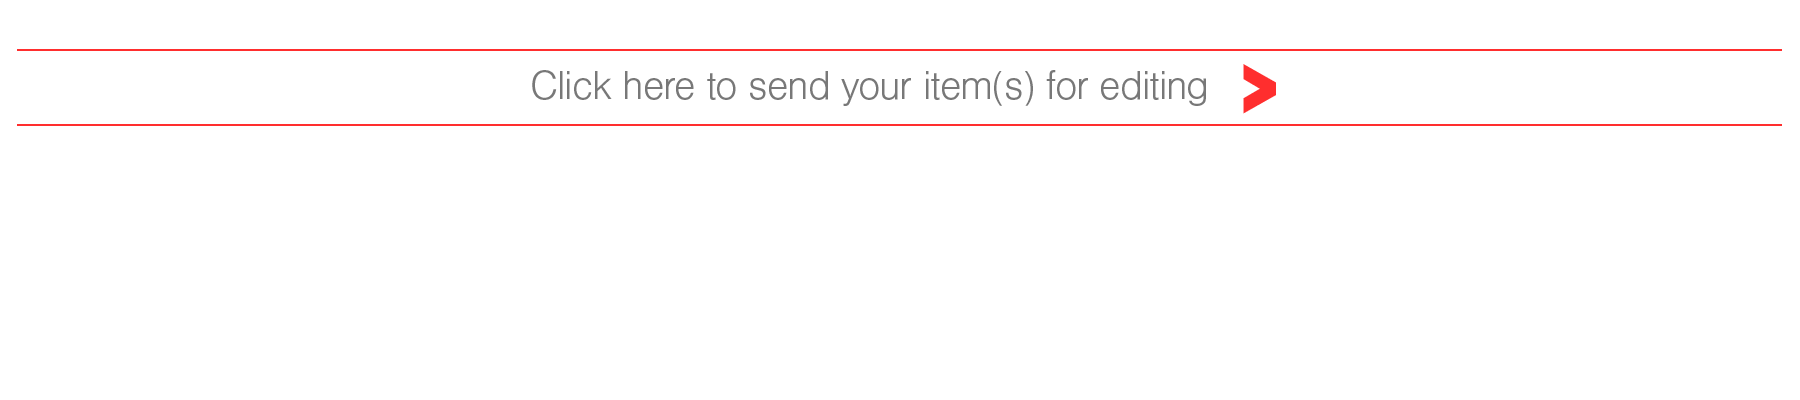 Click to send items